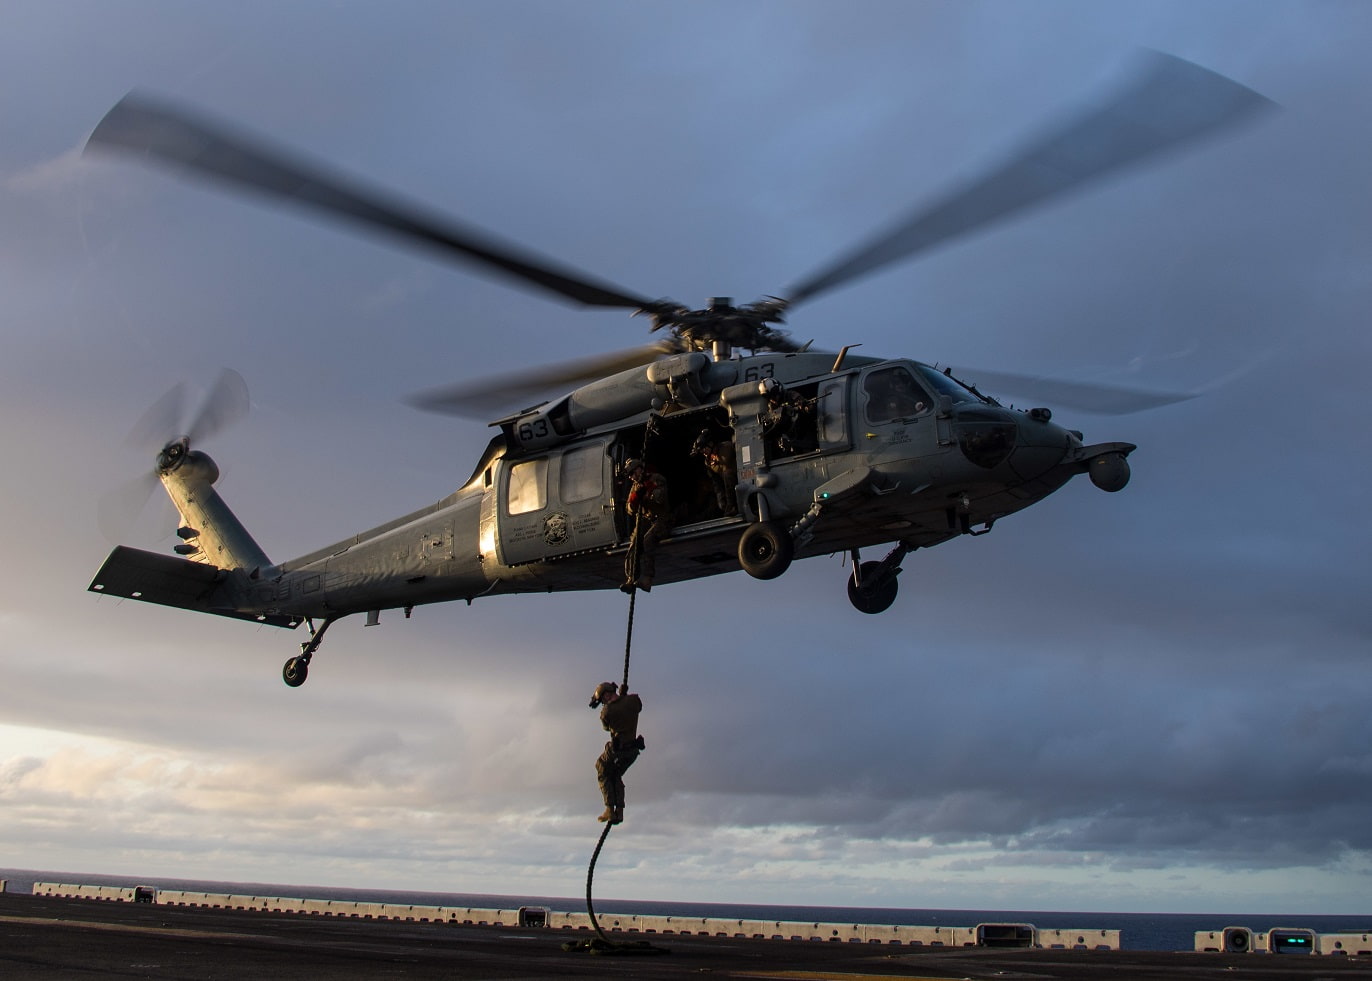 U.S. Marines conducts fast rope exercise from MH-60S Sea Hawk